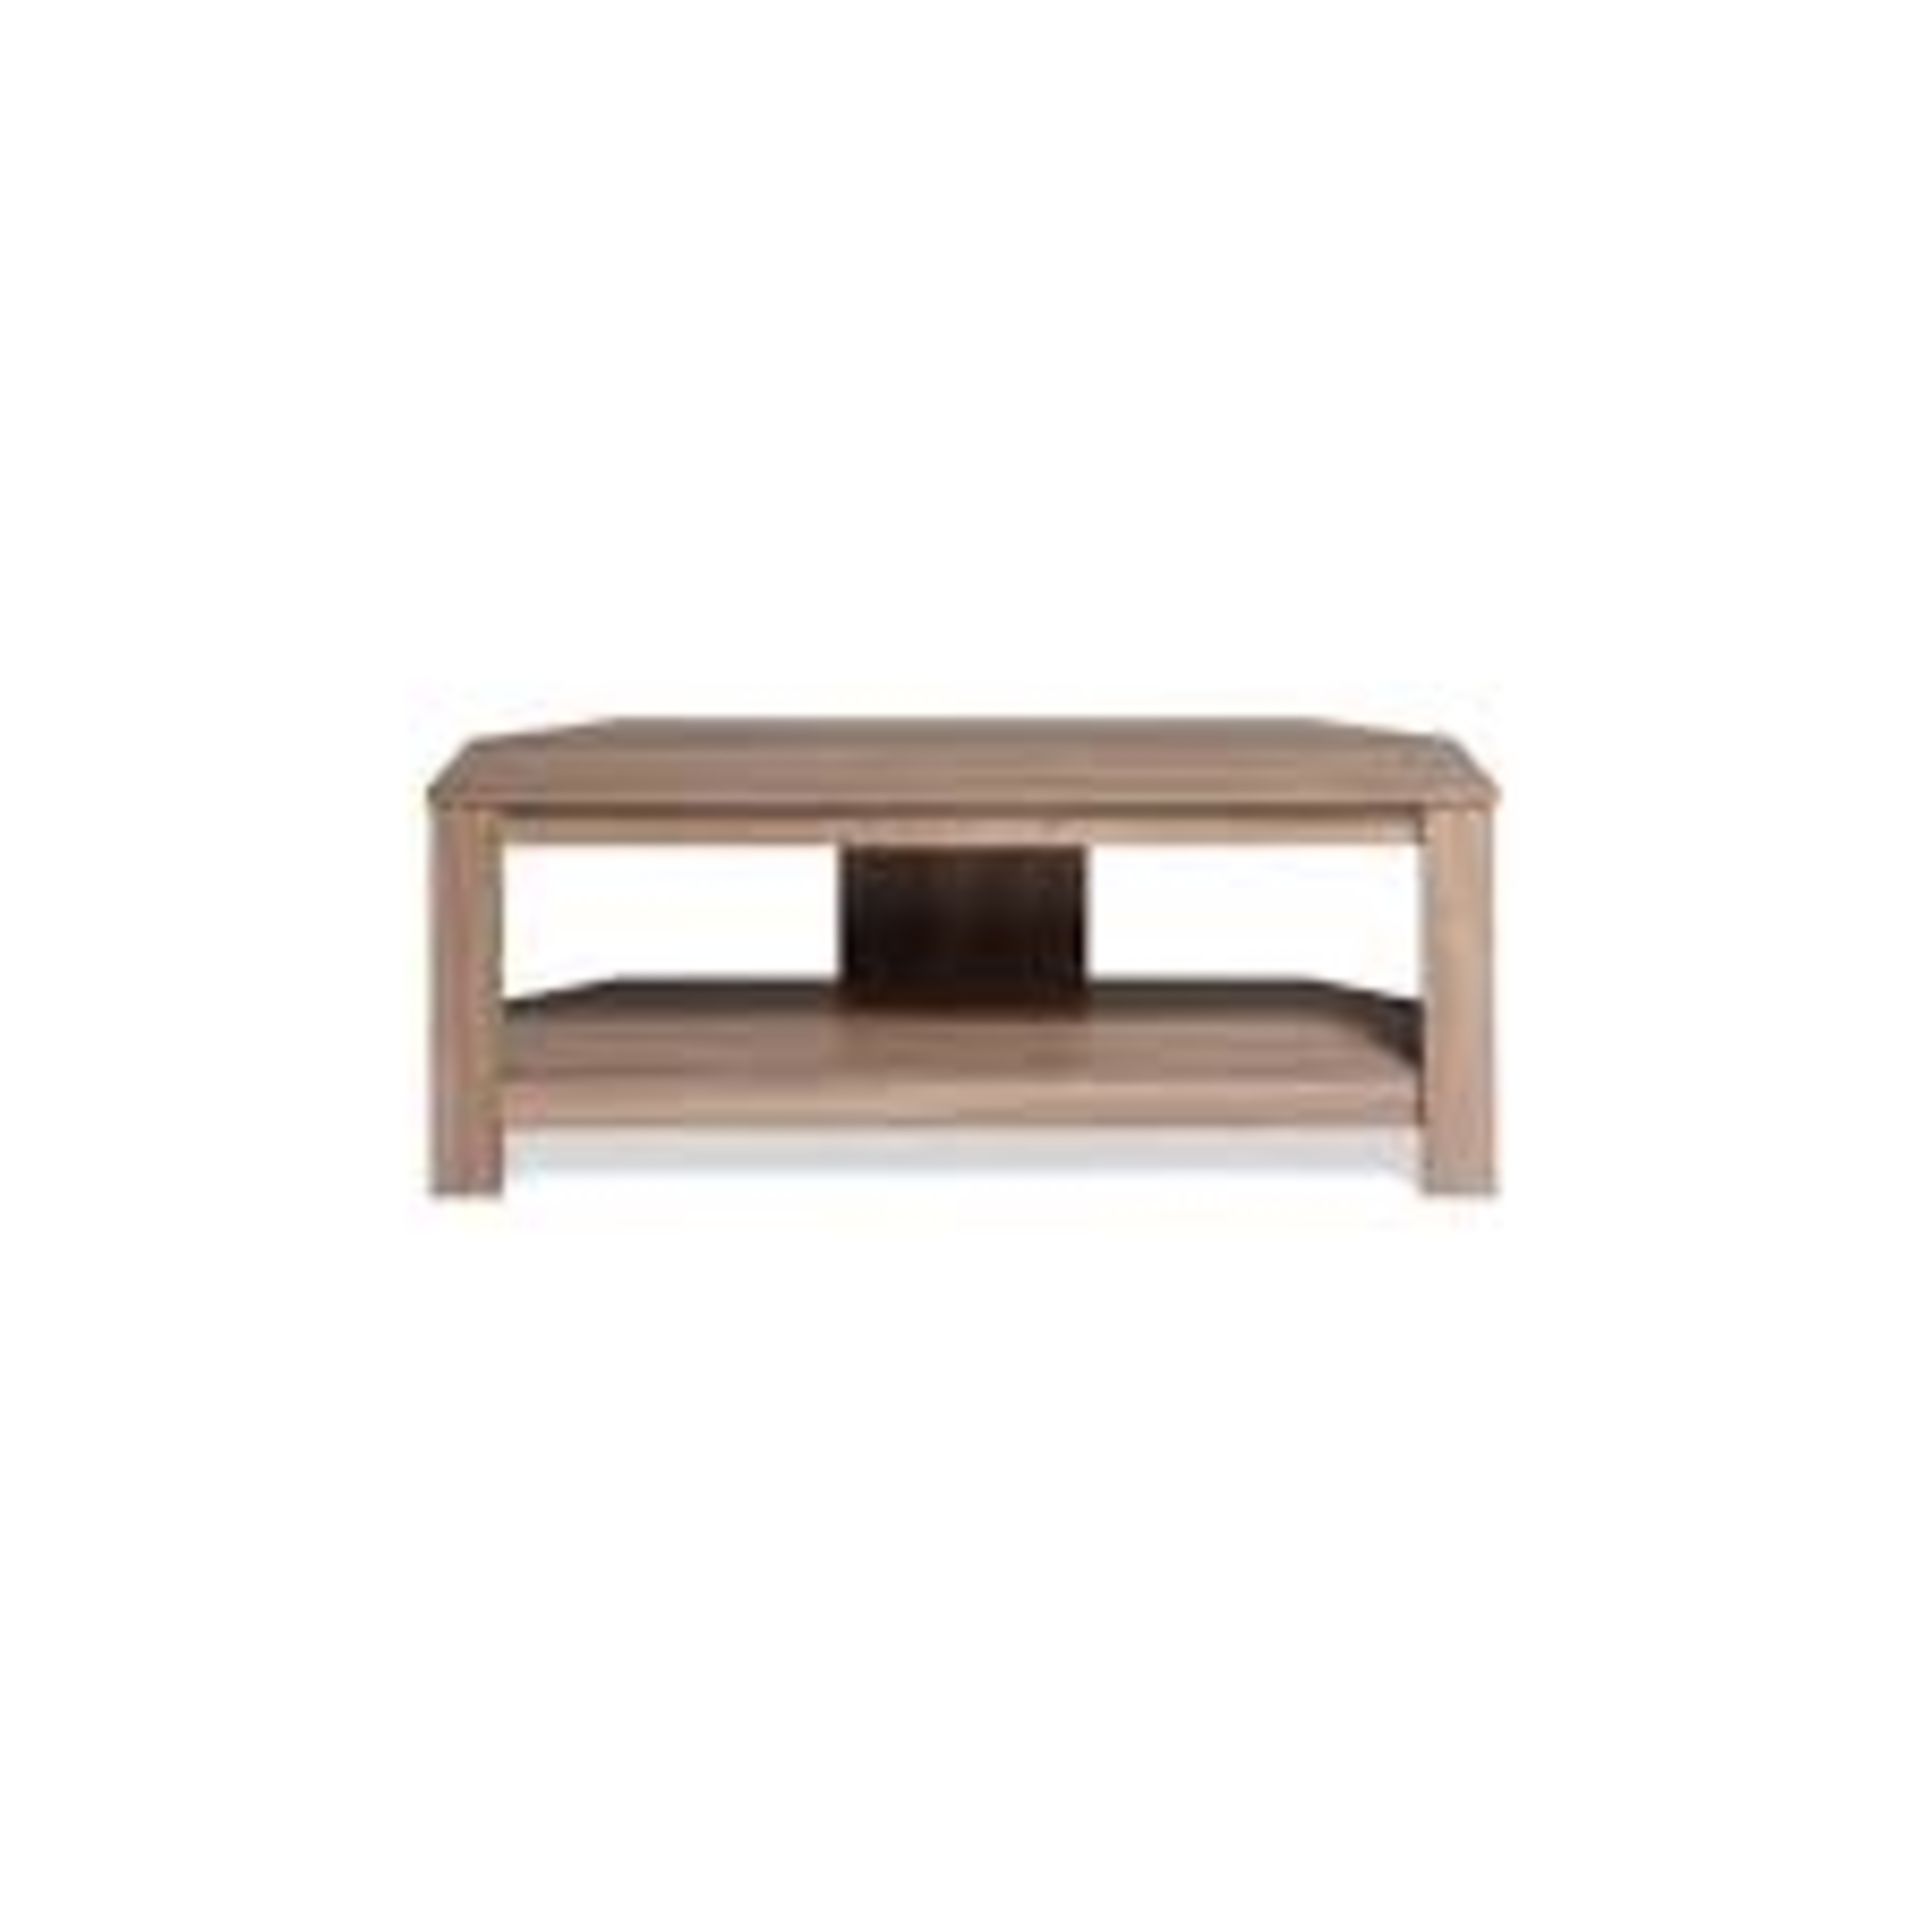 Boxed Tecolink Collibra Grey Oak TV Stand, RRP£60.00 (17922) (Public Viewing and Appraisals